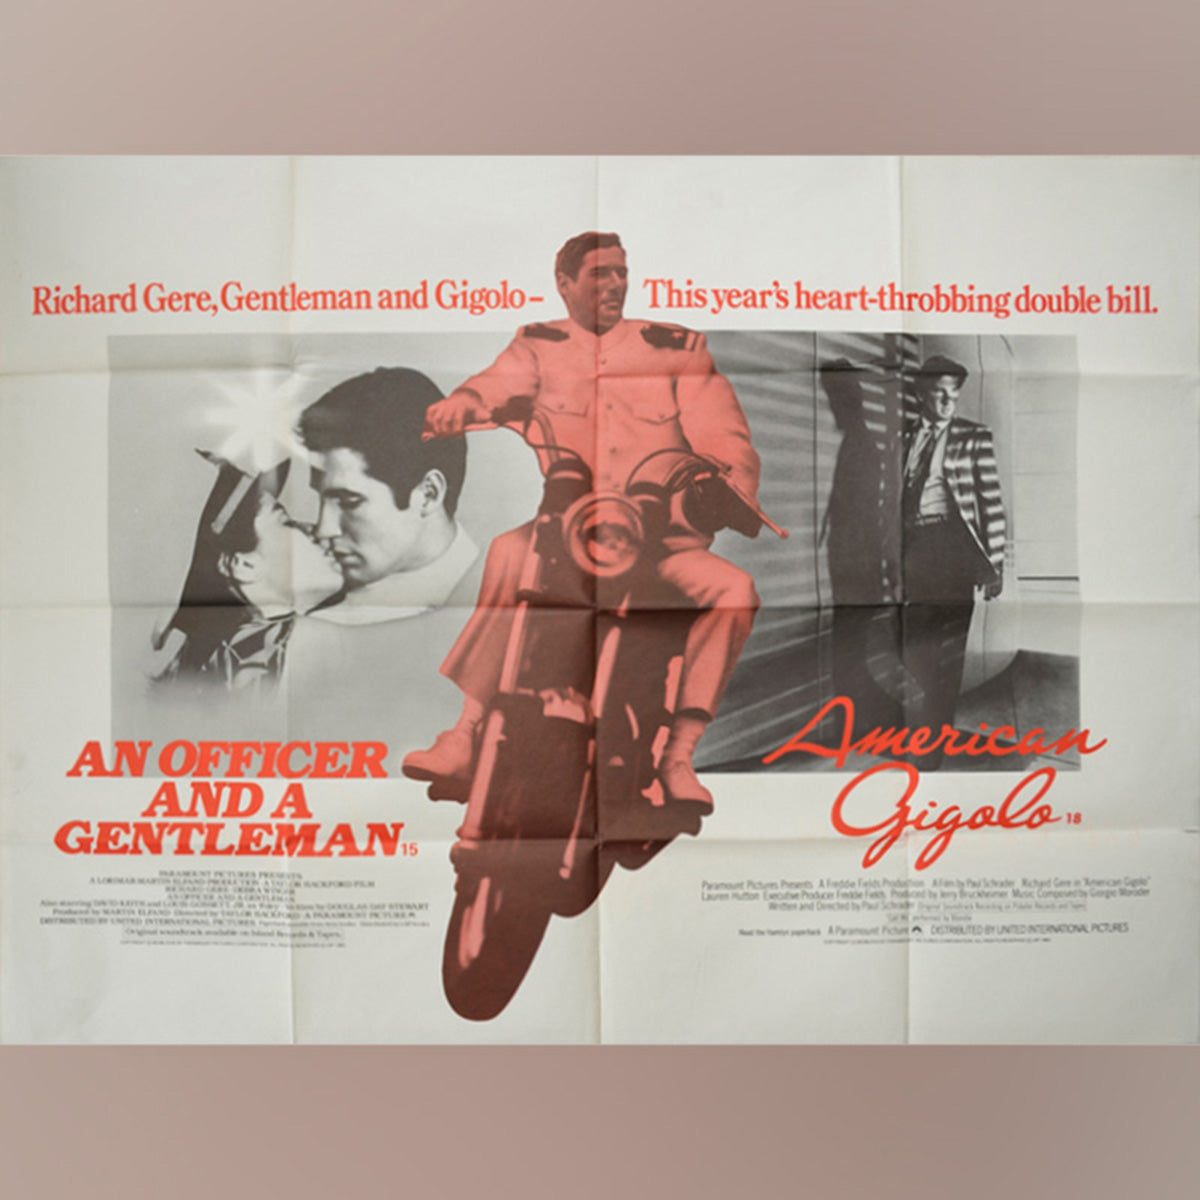 Original Movie Poster of An Officer And A Gentleman / American Gigolo (1983)